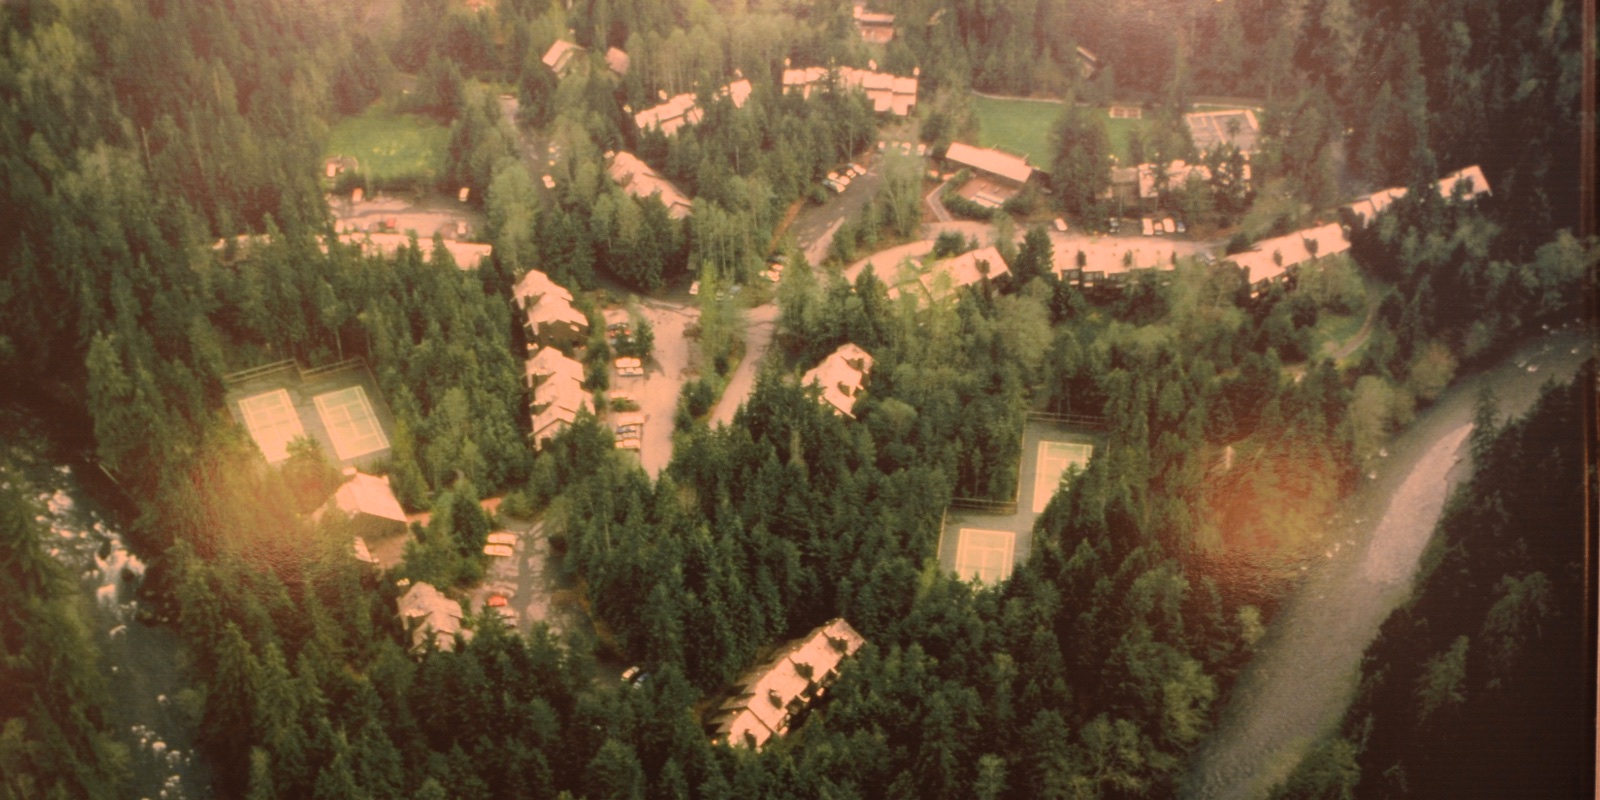 Snowater site from the air